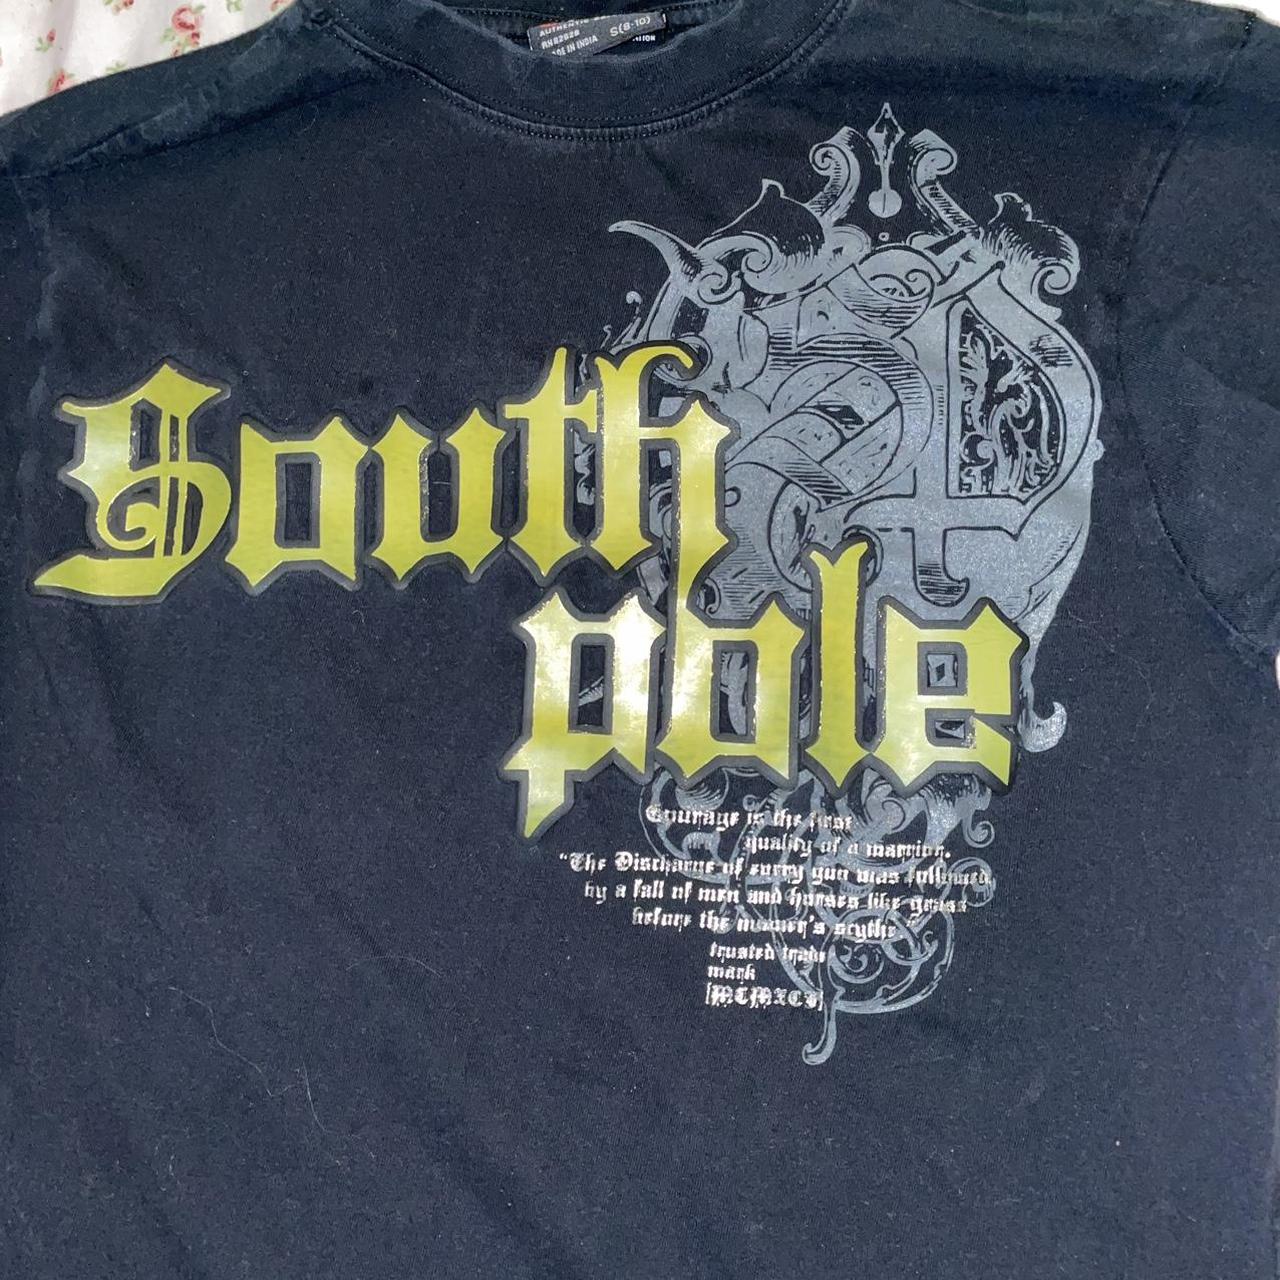 South Pole black tee with grey and gold green text - Depop